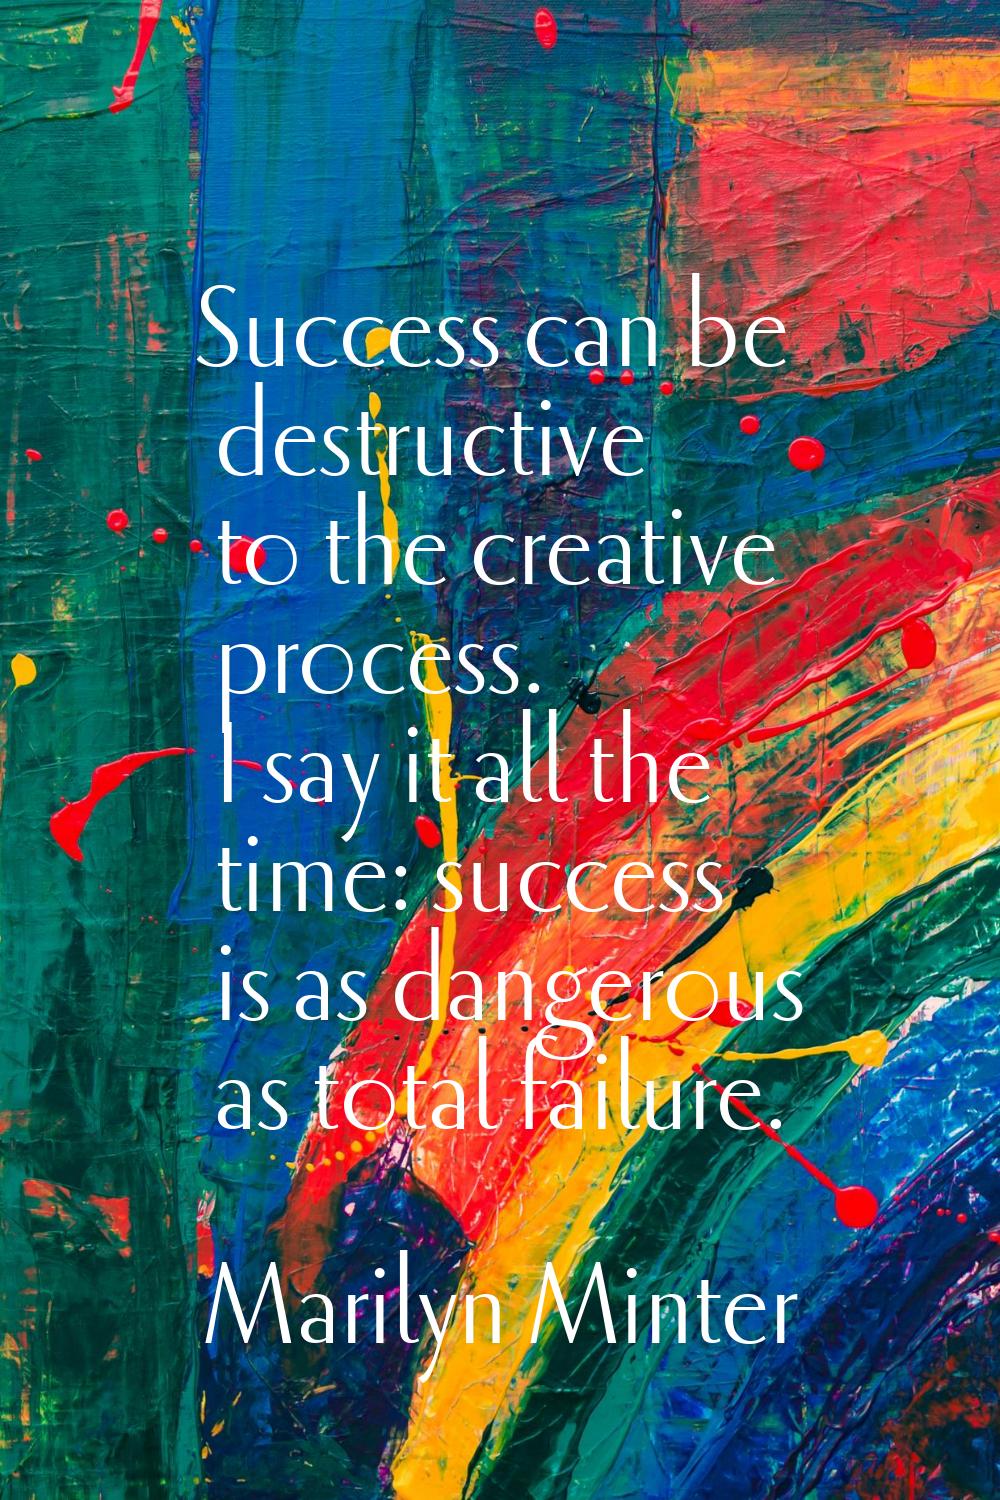 Success can be destructive to the creative process. I say it all the time: success is as dangerous 